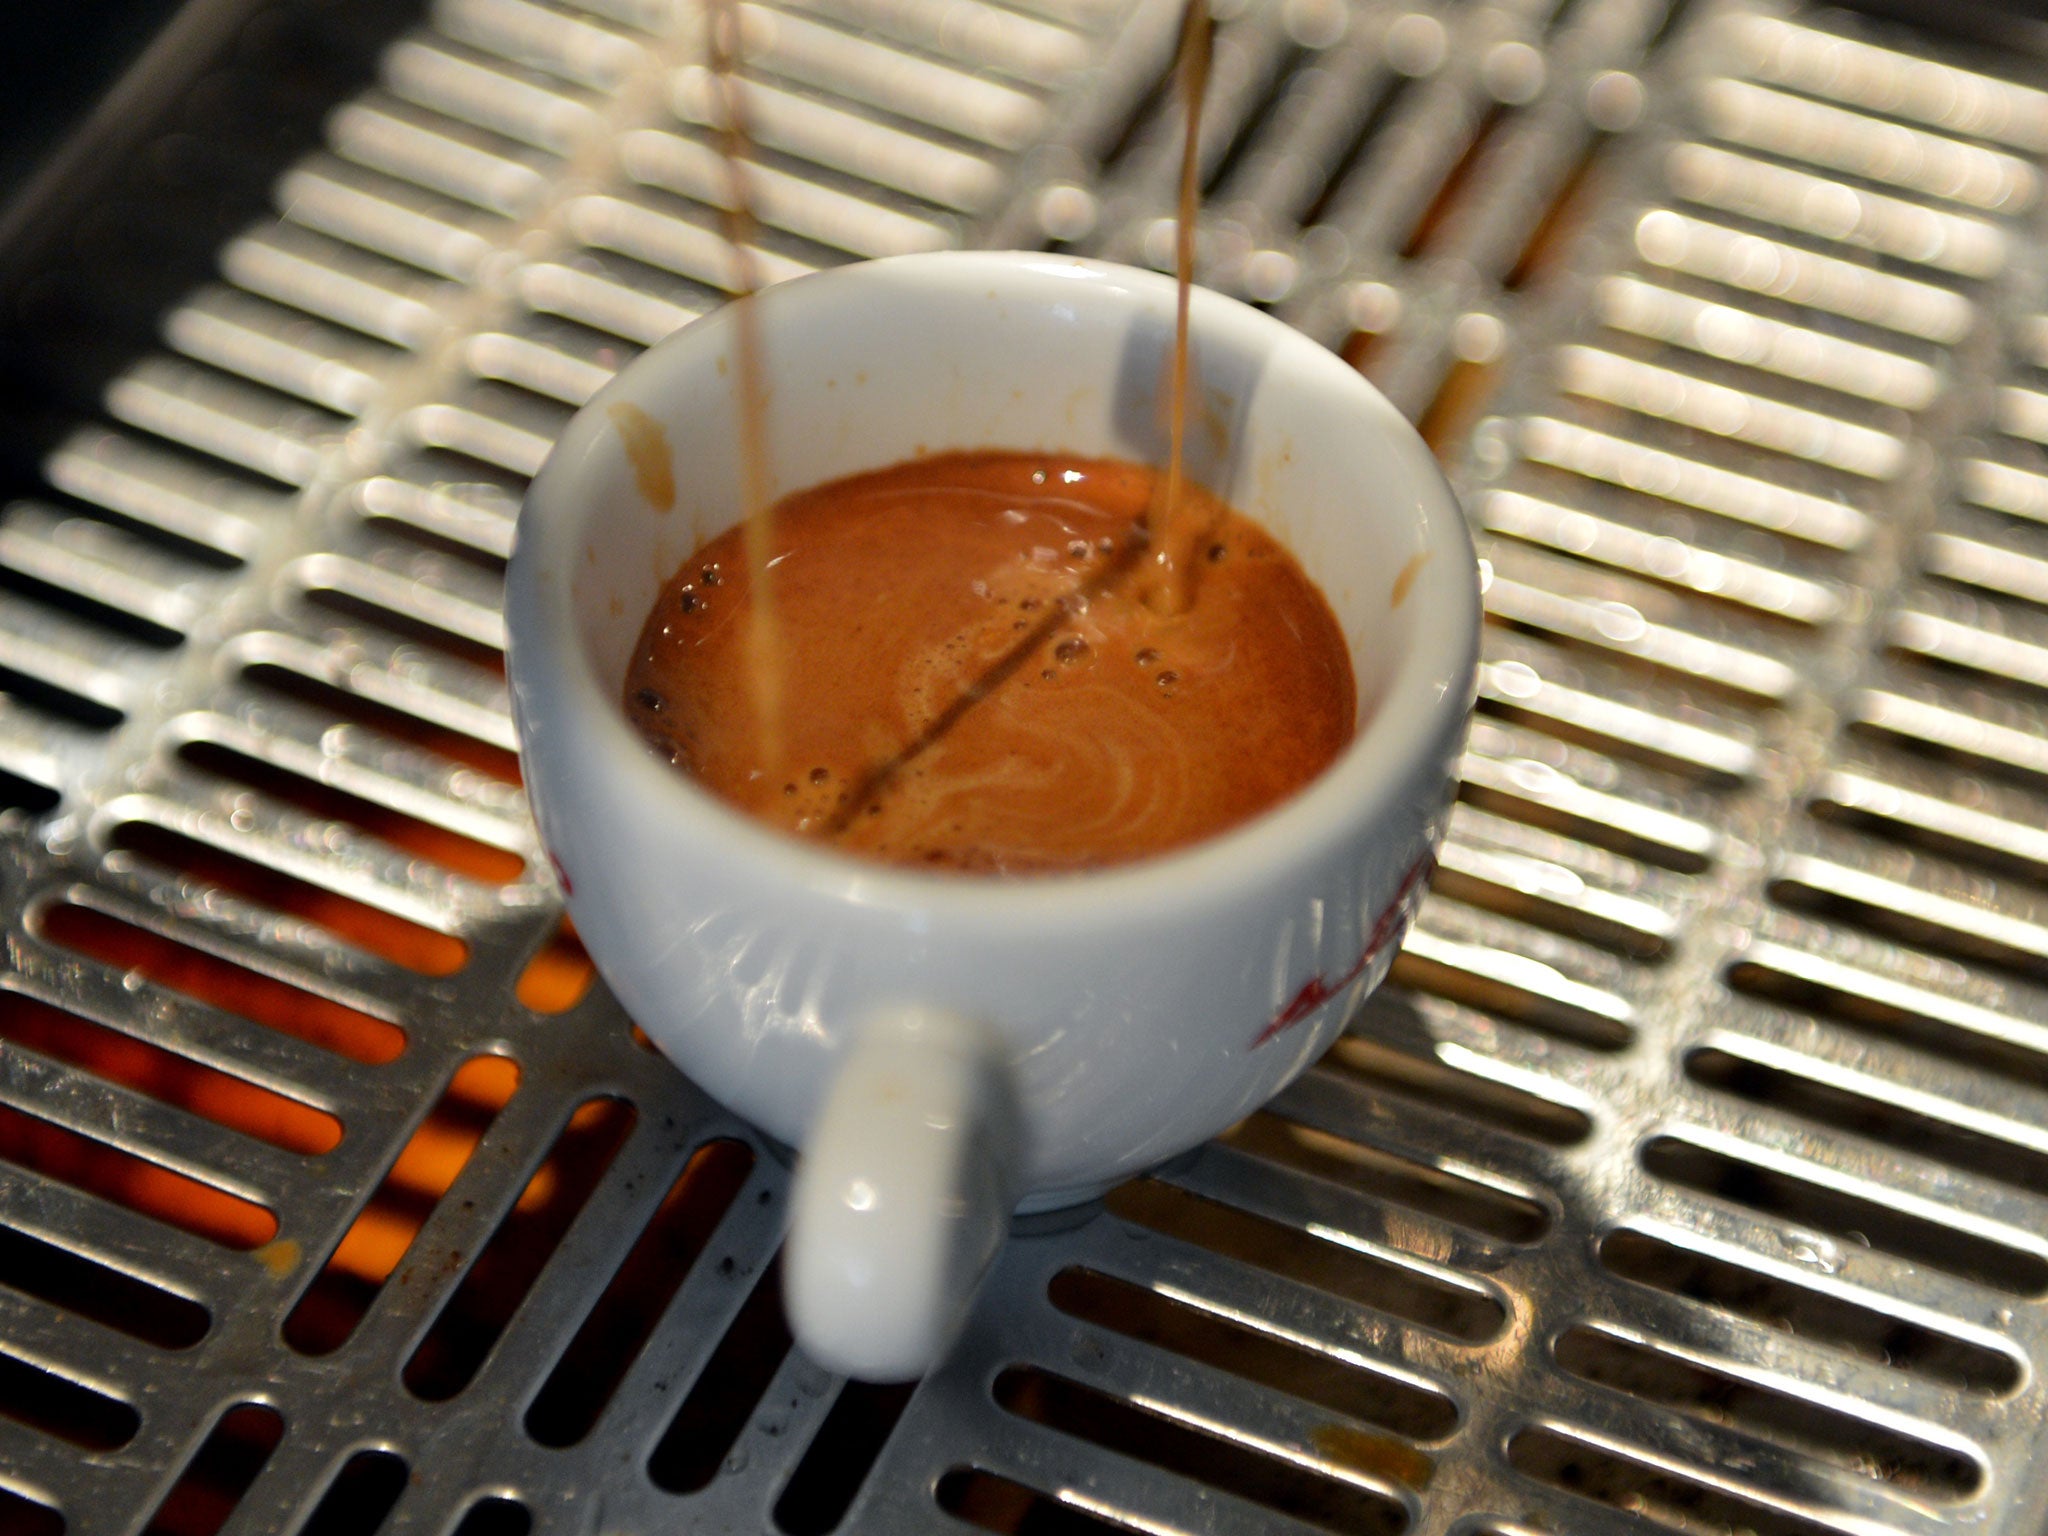 A double espresso after revision might be the best way of preparing for an exam, new research suggests